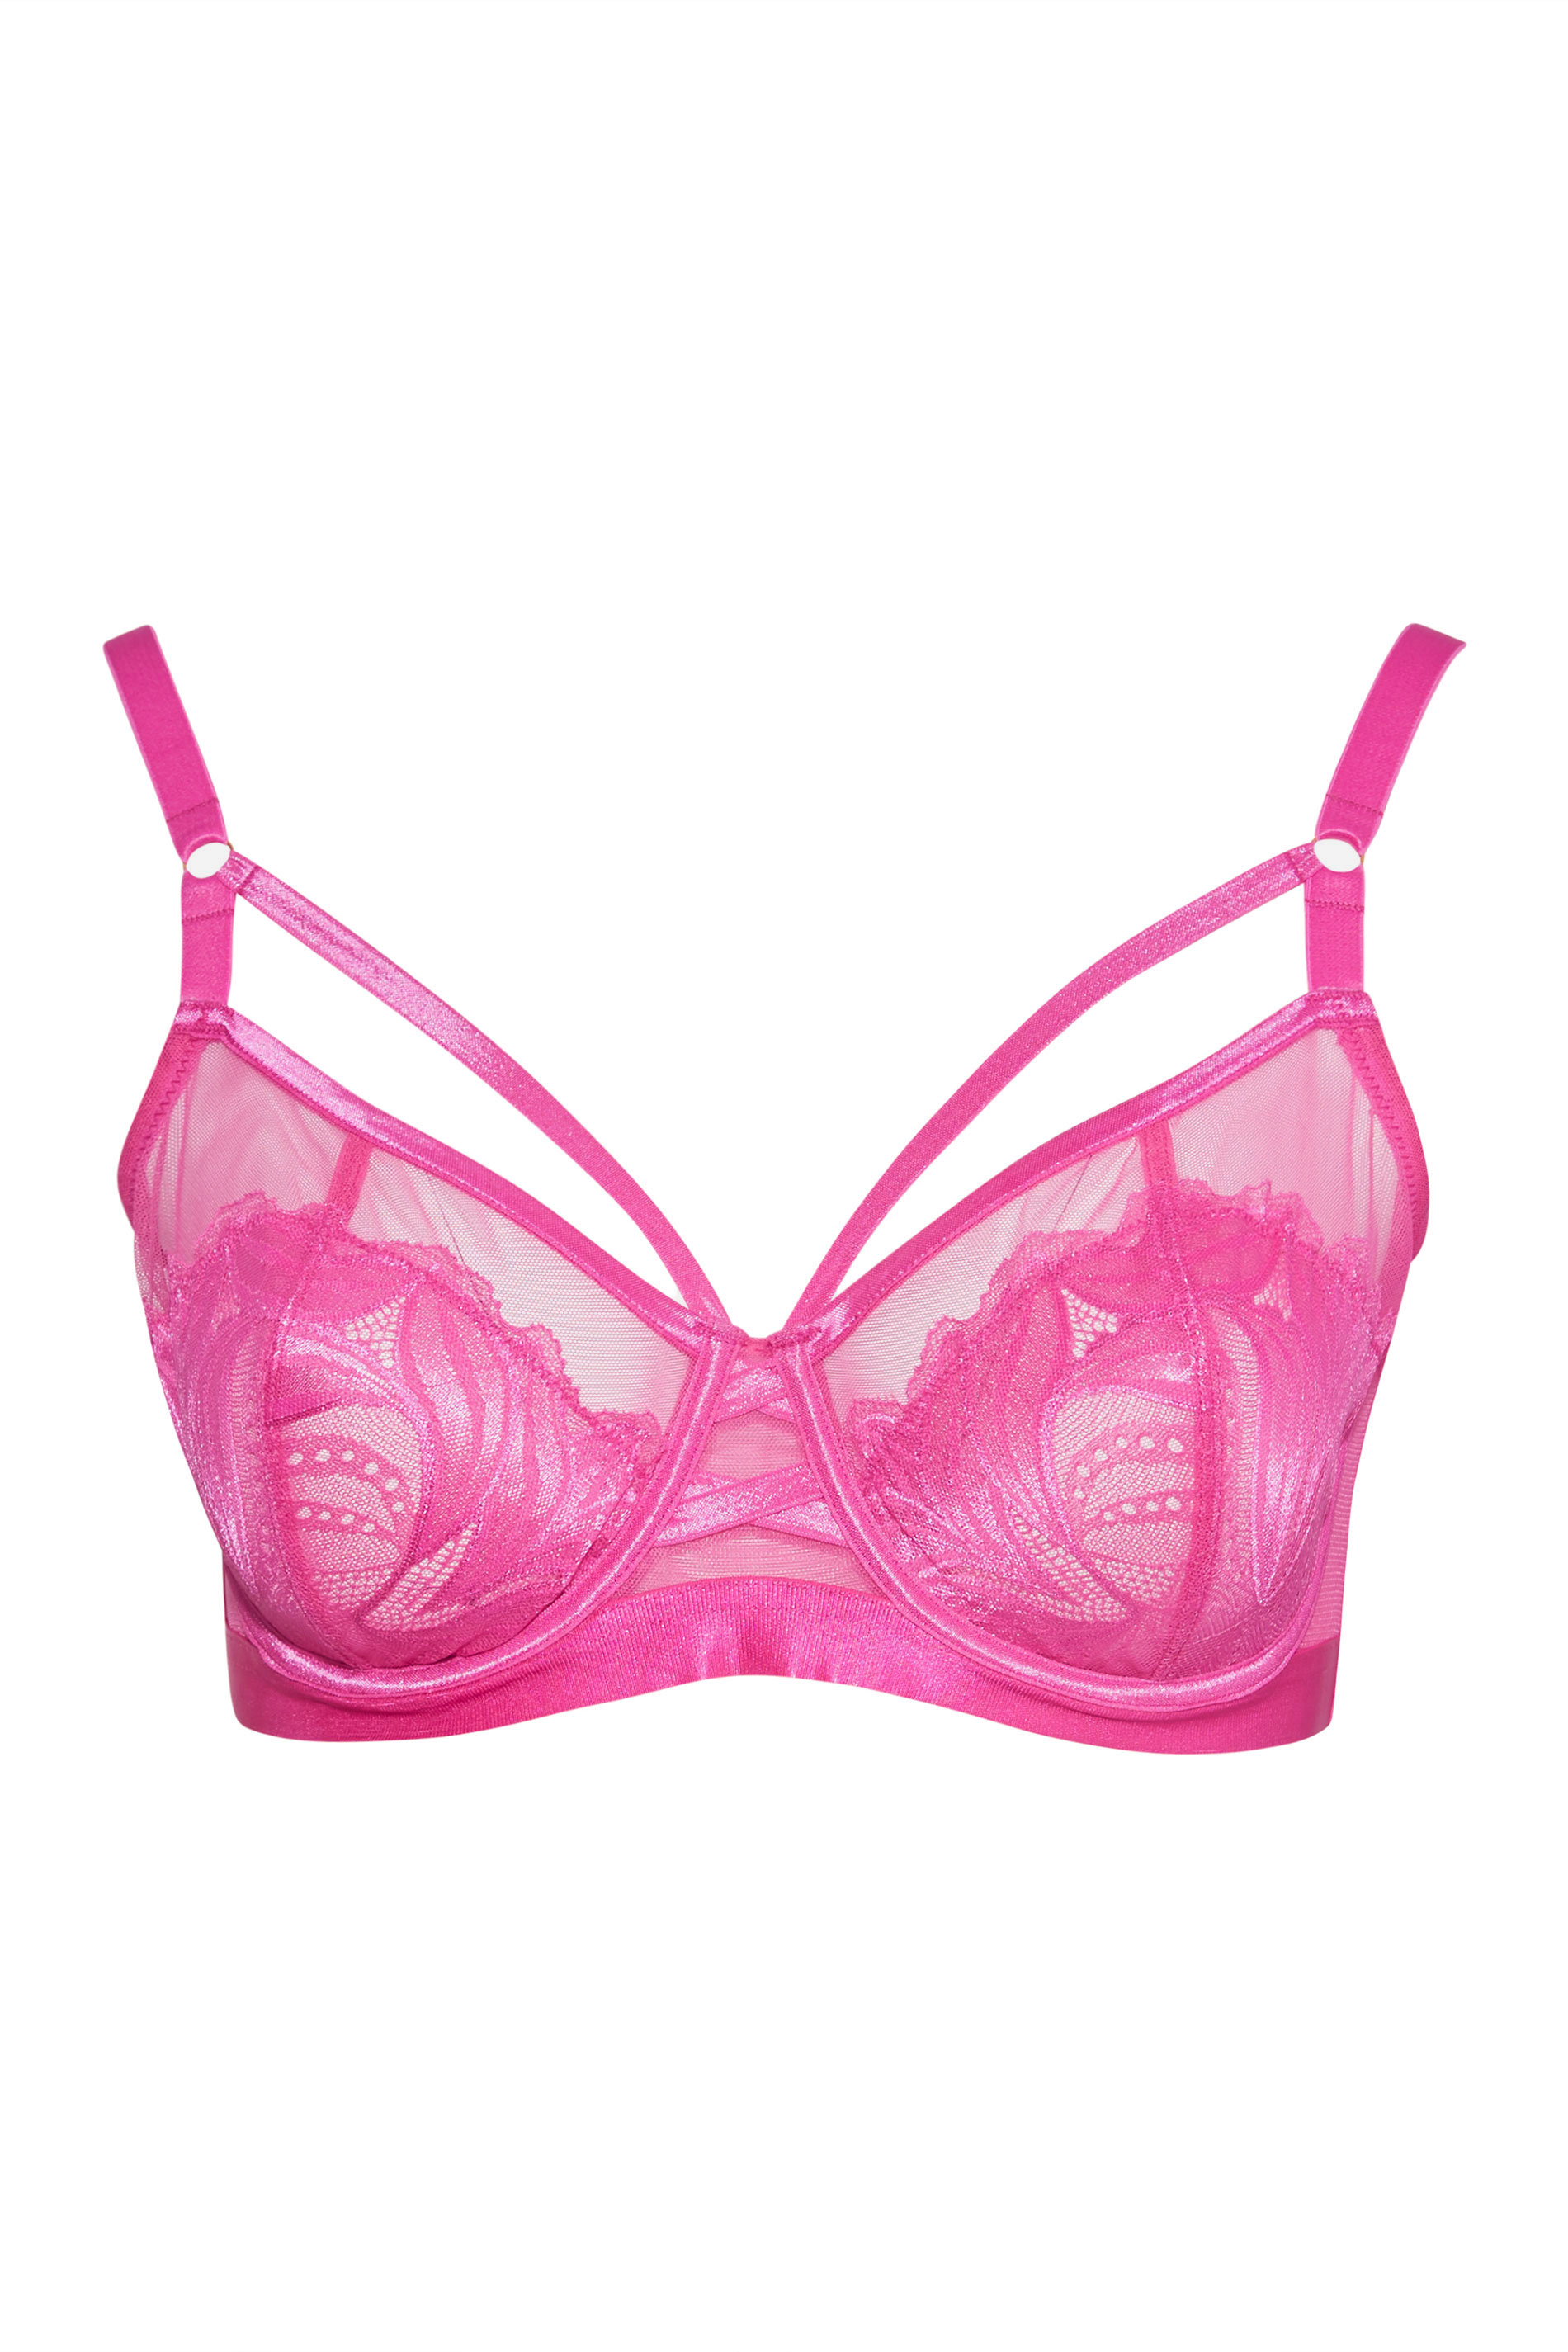 Plus Size Hot Pink Lace Strap Detail Non-Padded Underwired Balcony Bra